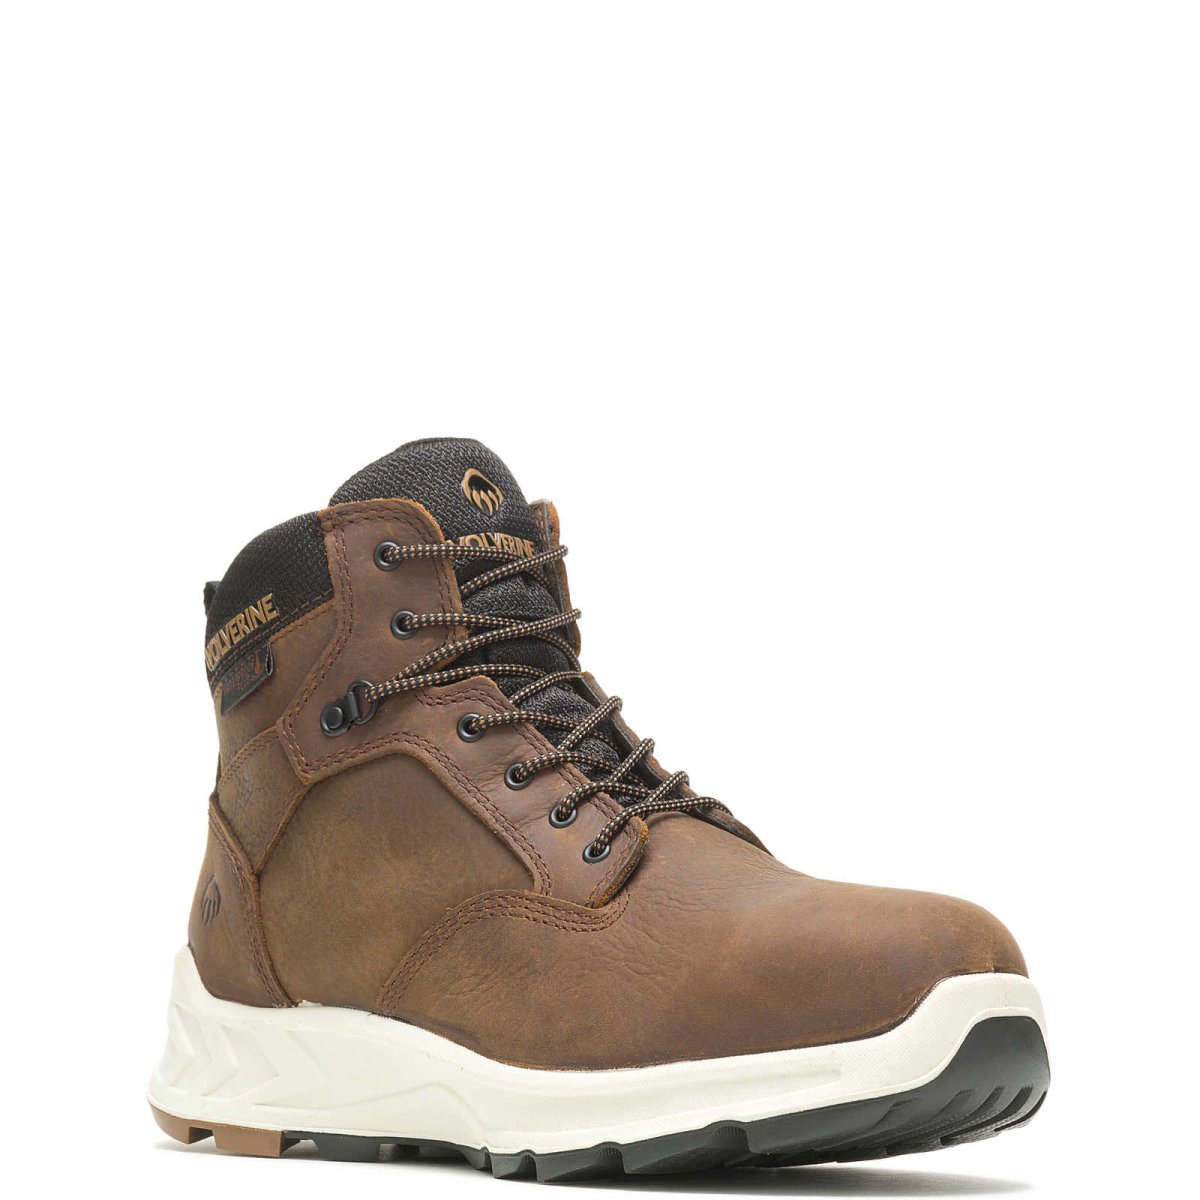 WOLVERINE SHIFTPLUS LX 6" SAFETY TOE MEN'S WORK BOOT (W201156) IN BROWN - TLW Shoes